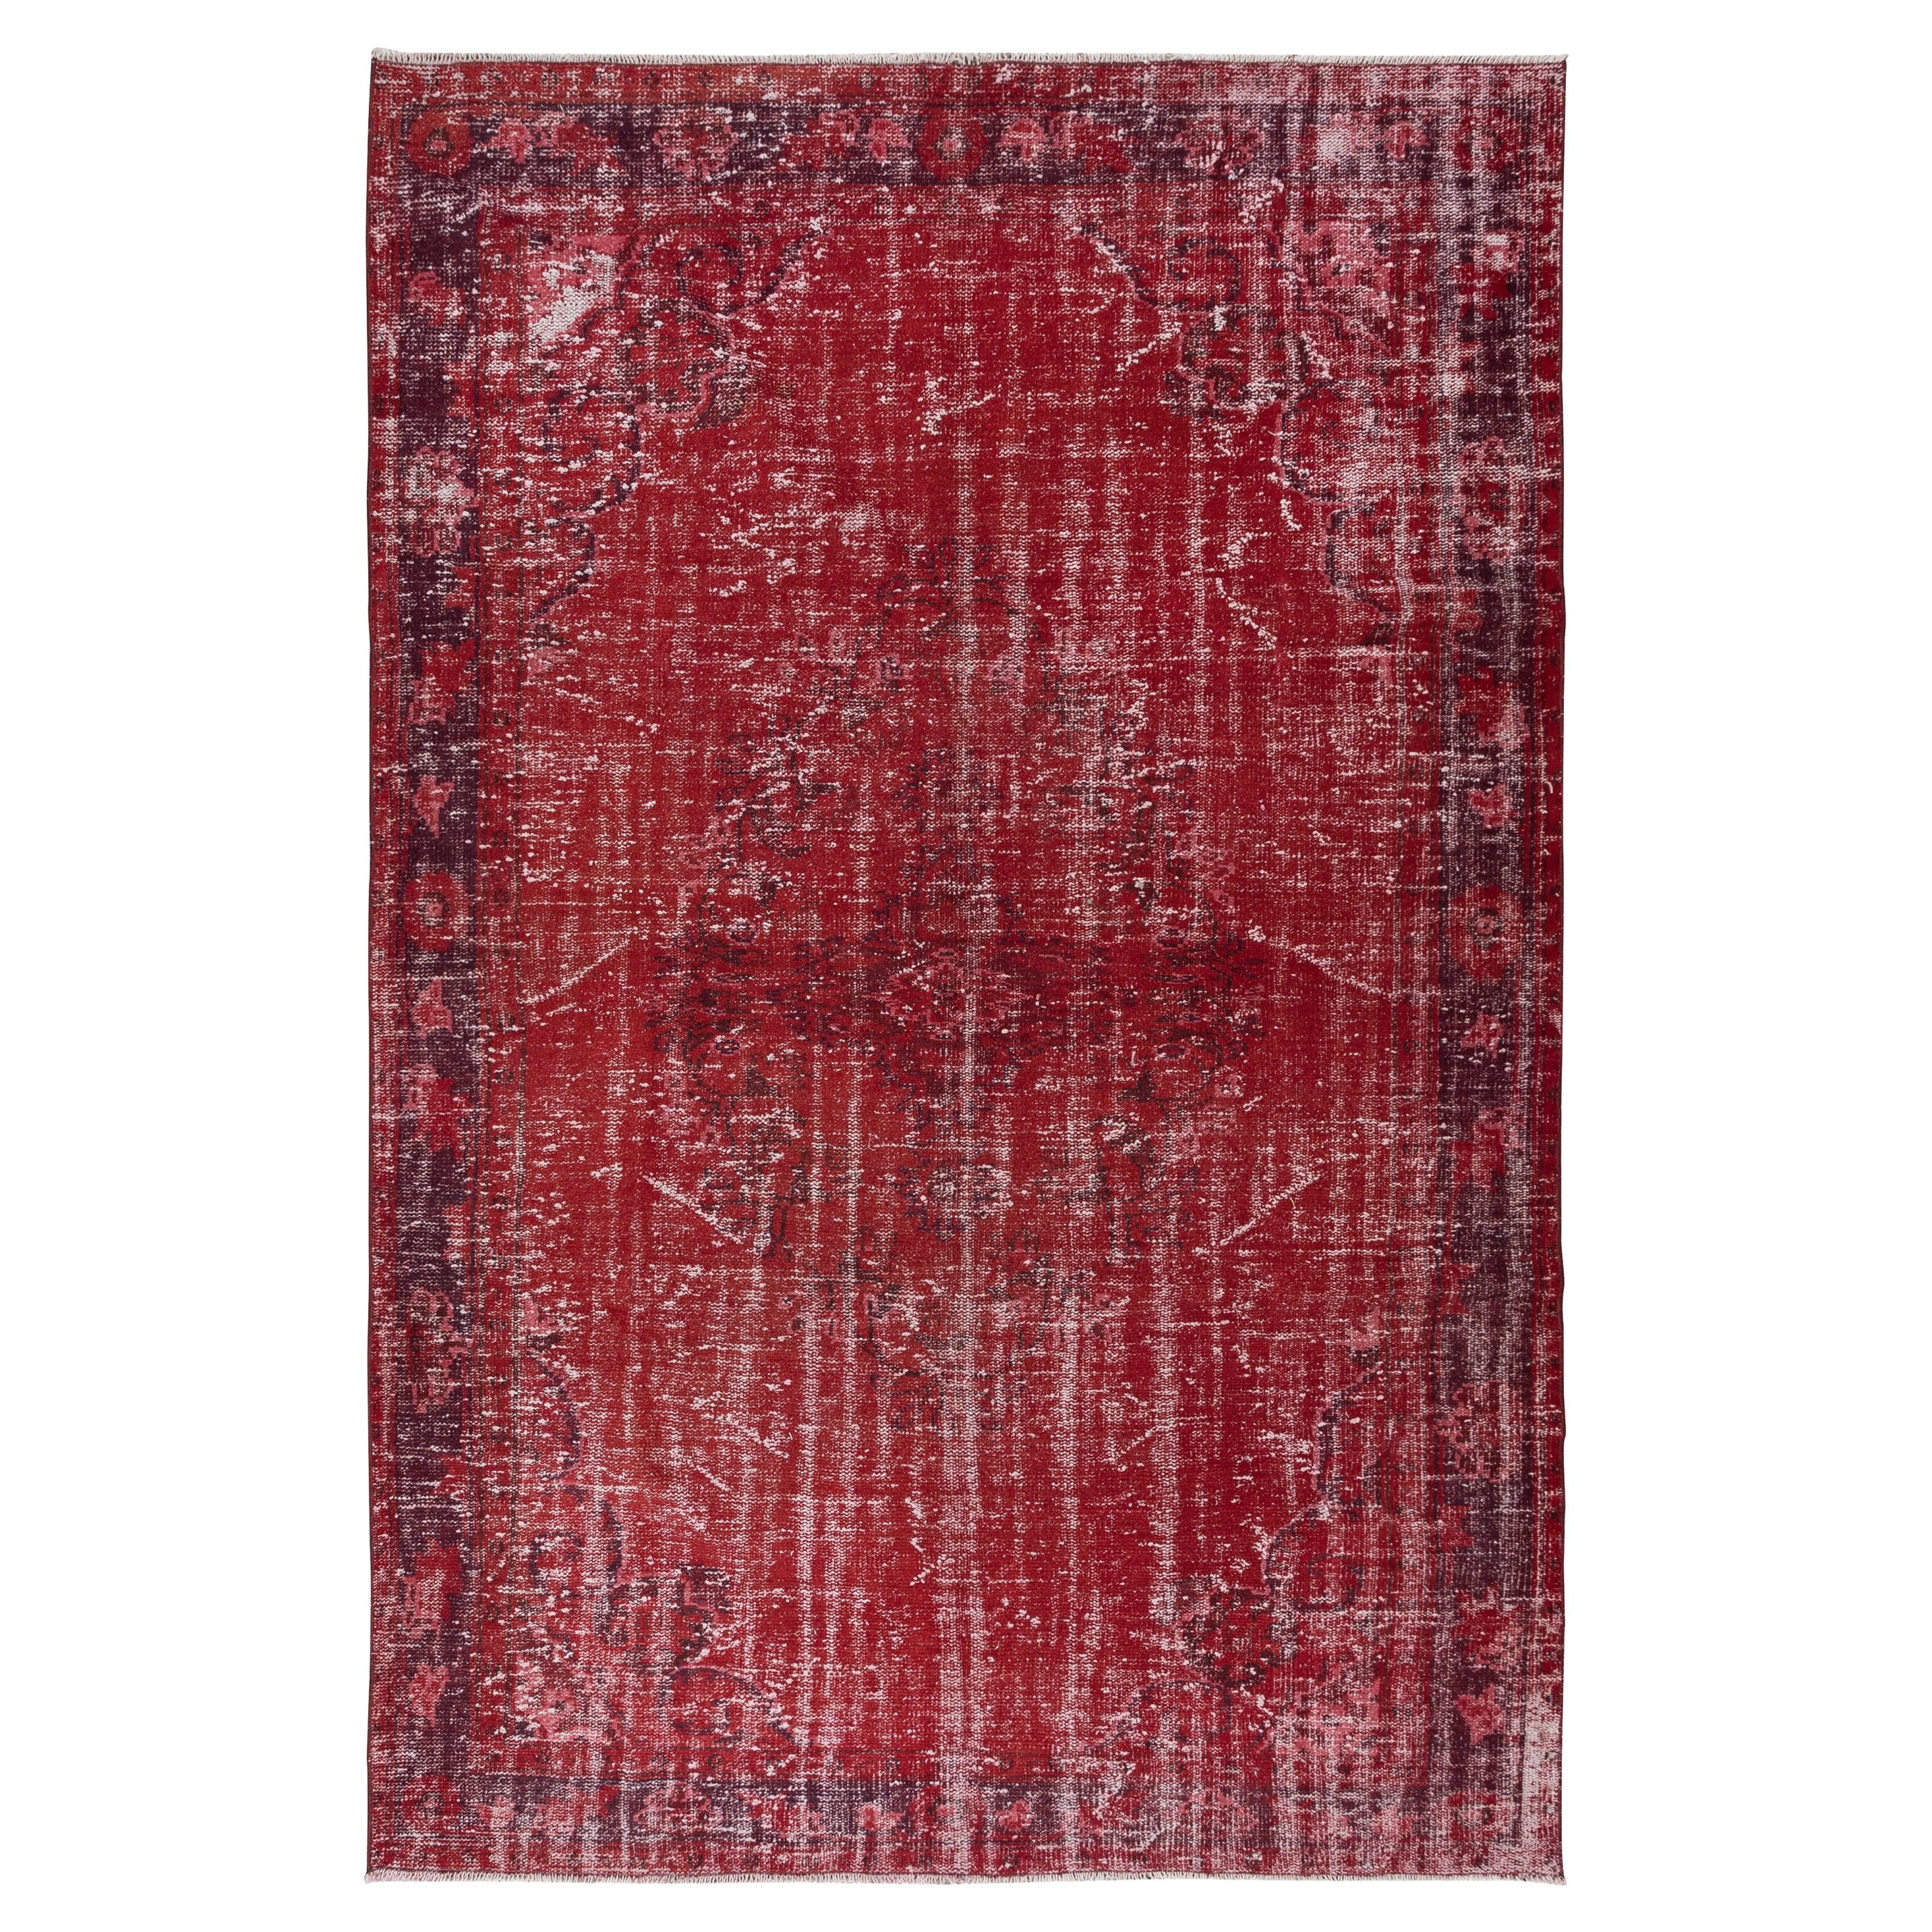 6x9.2 Ft Contemporary Handmade Turkish Red Area Rug with Shabby Chic Style For Sale